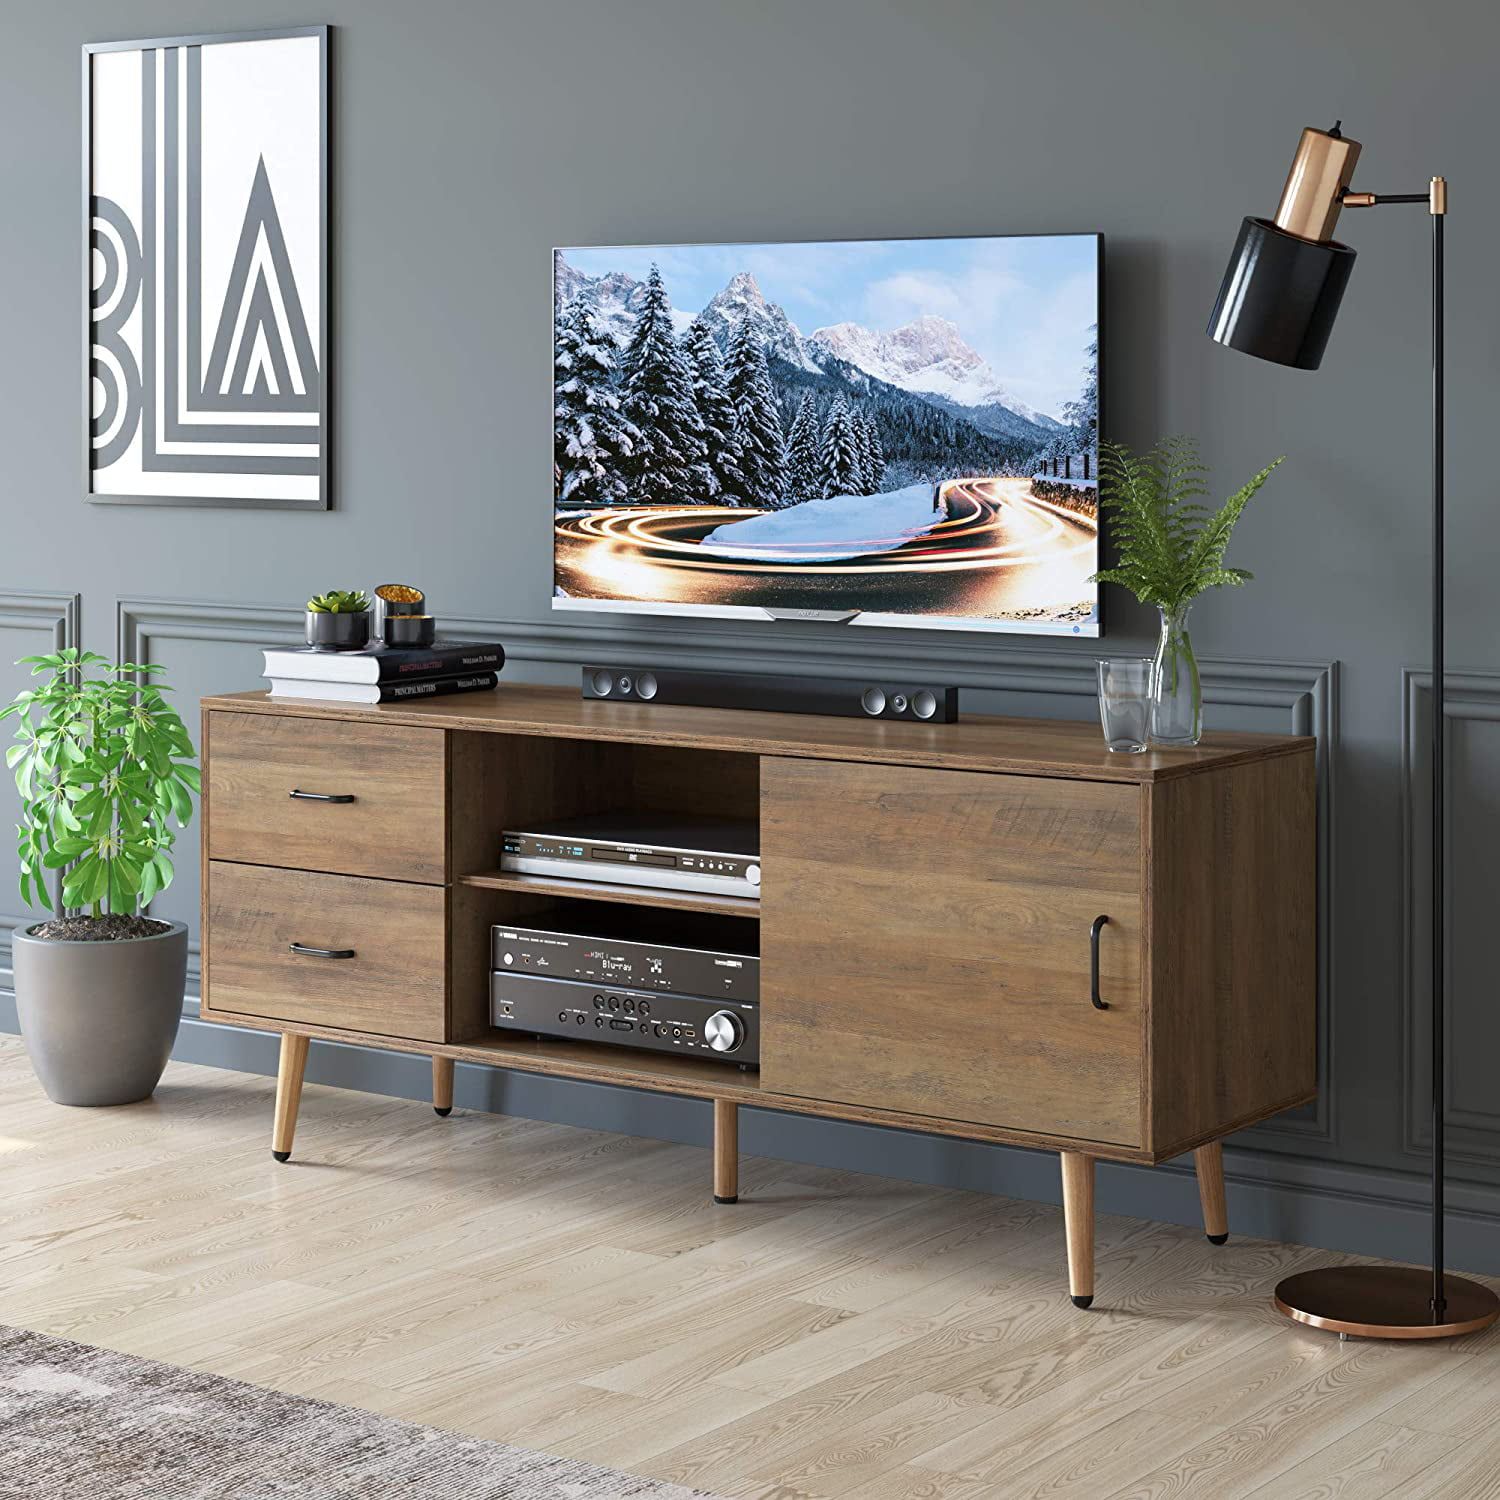 Homfa Tv Cabinet Media Console Table, Wood Tv Stand For Tvs Up To 60 Inside Tv Stands With 2 Doors And 2 Open Shelves (Gallery 2 of 20)